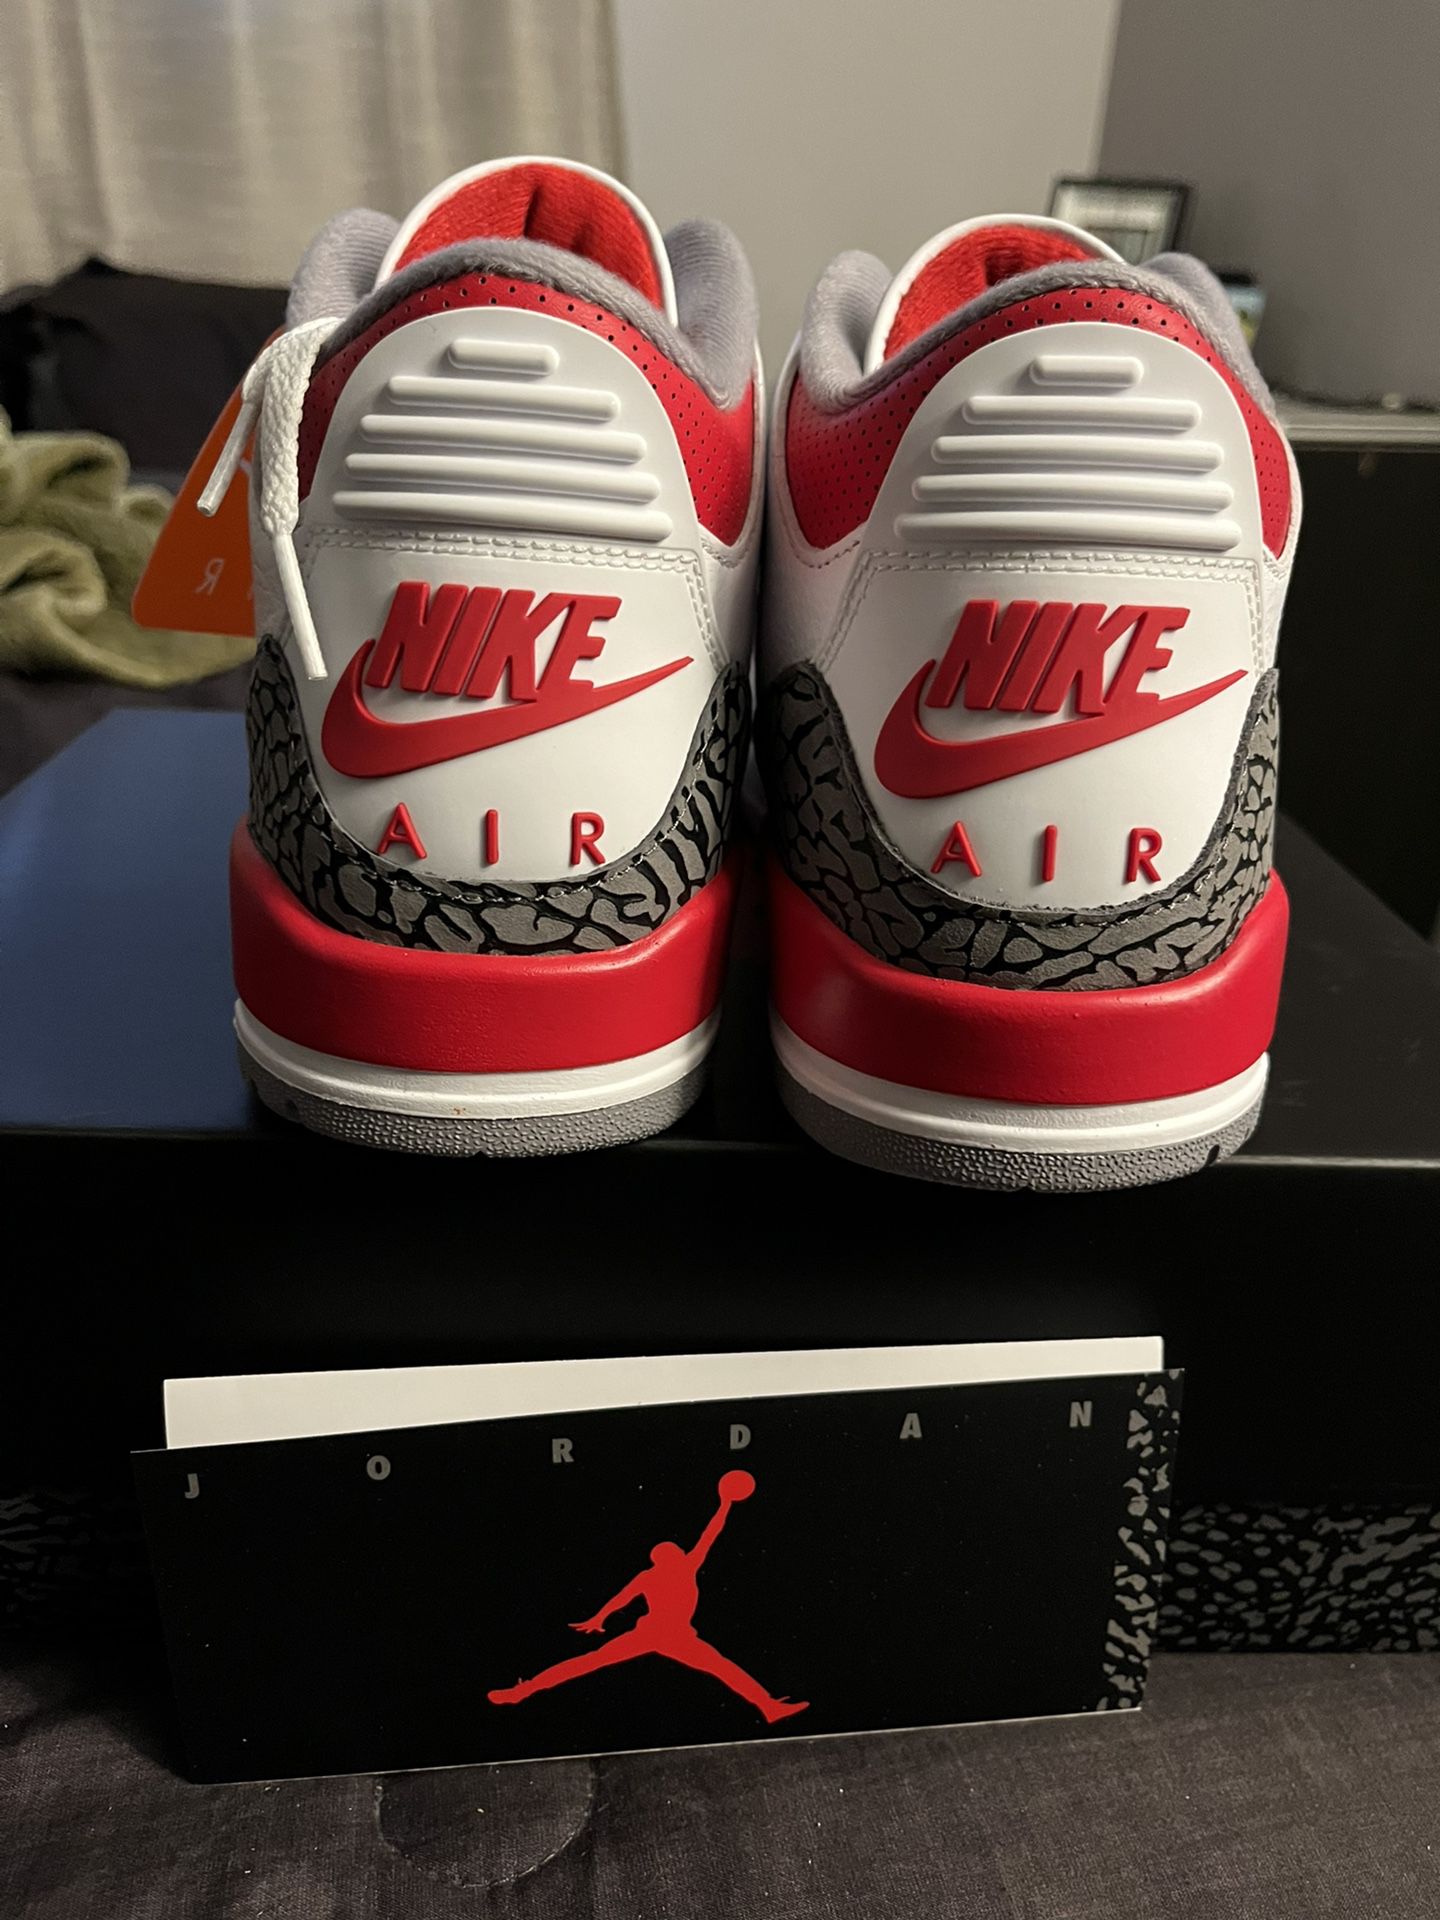 Fire Red 3s 